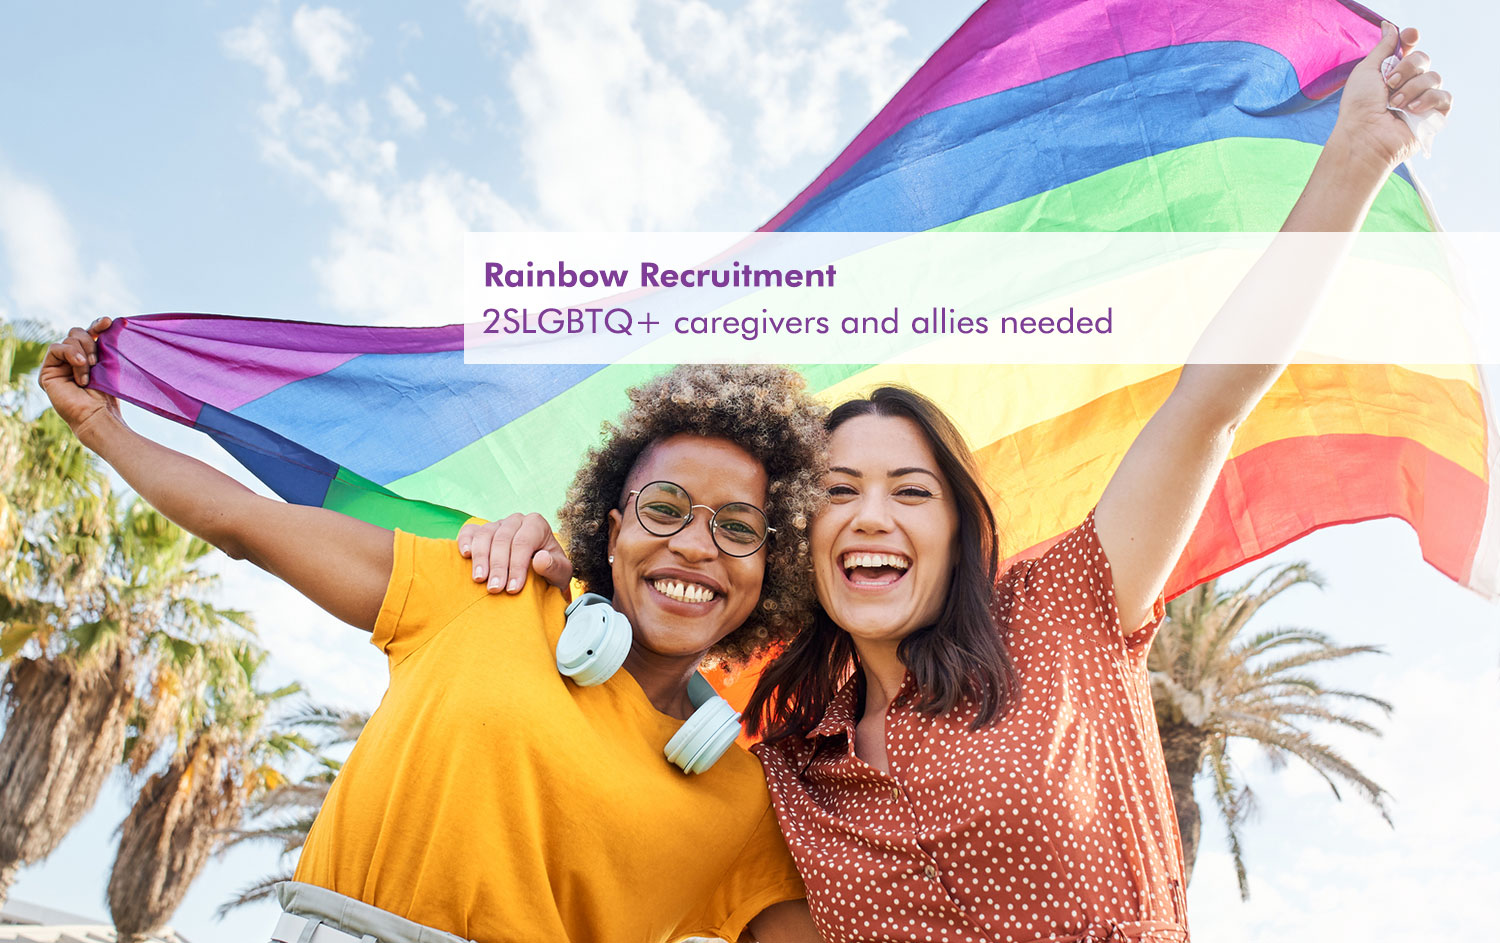 2SLGBTQ+ caregivers and allies needed